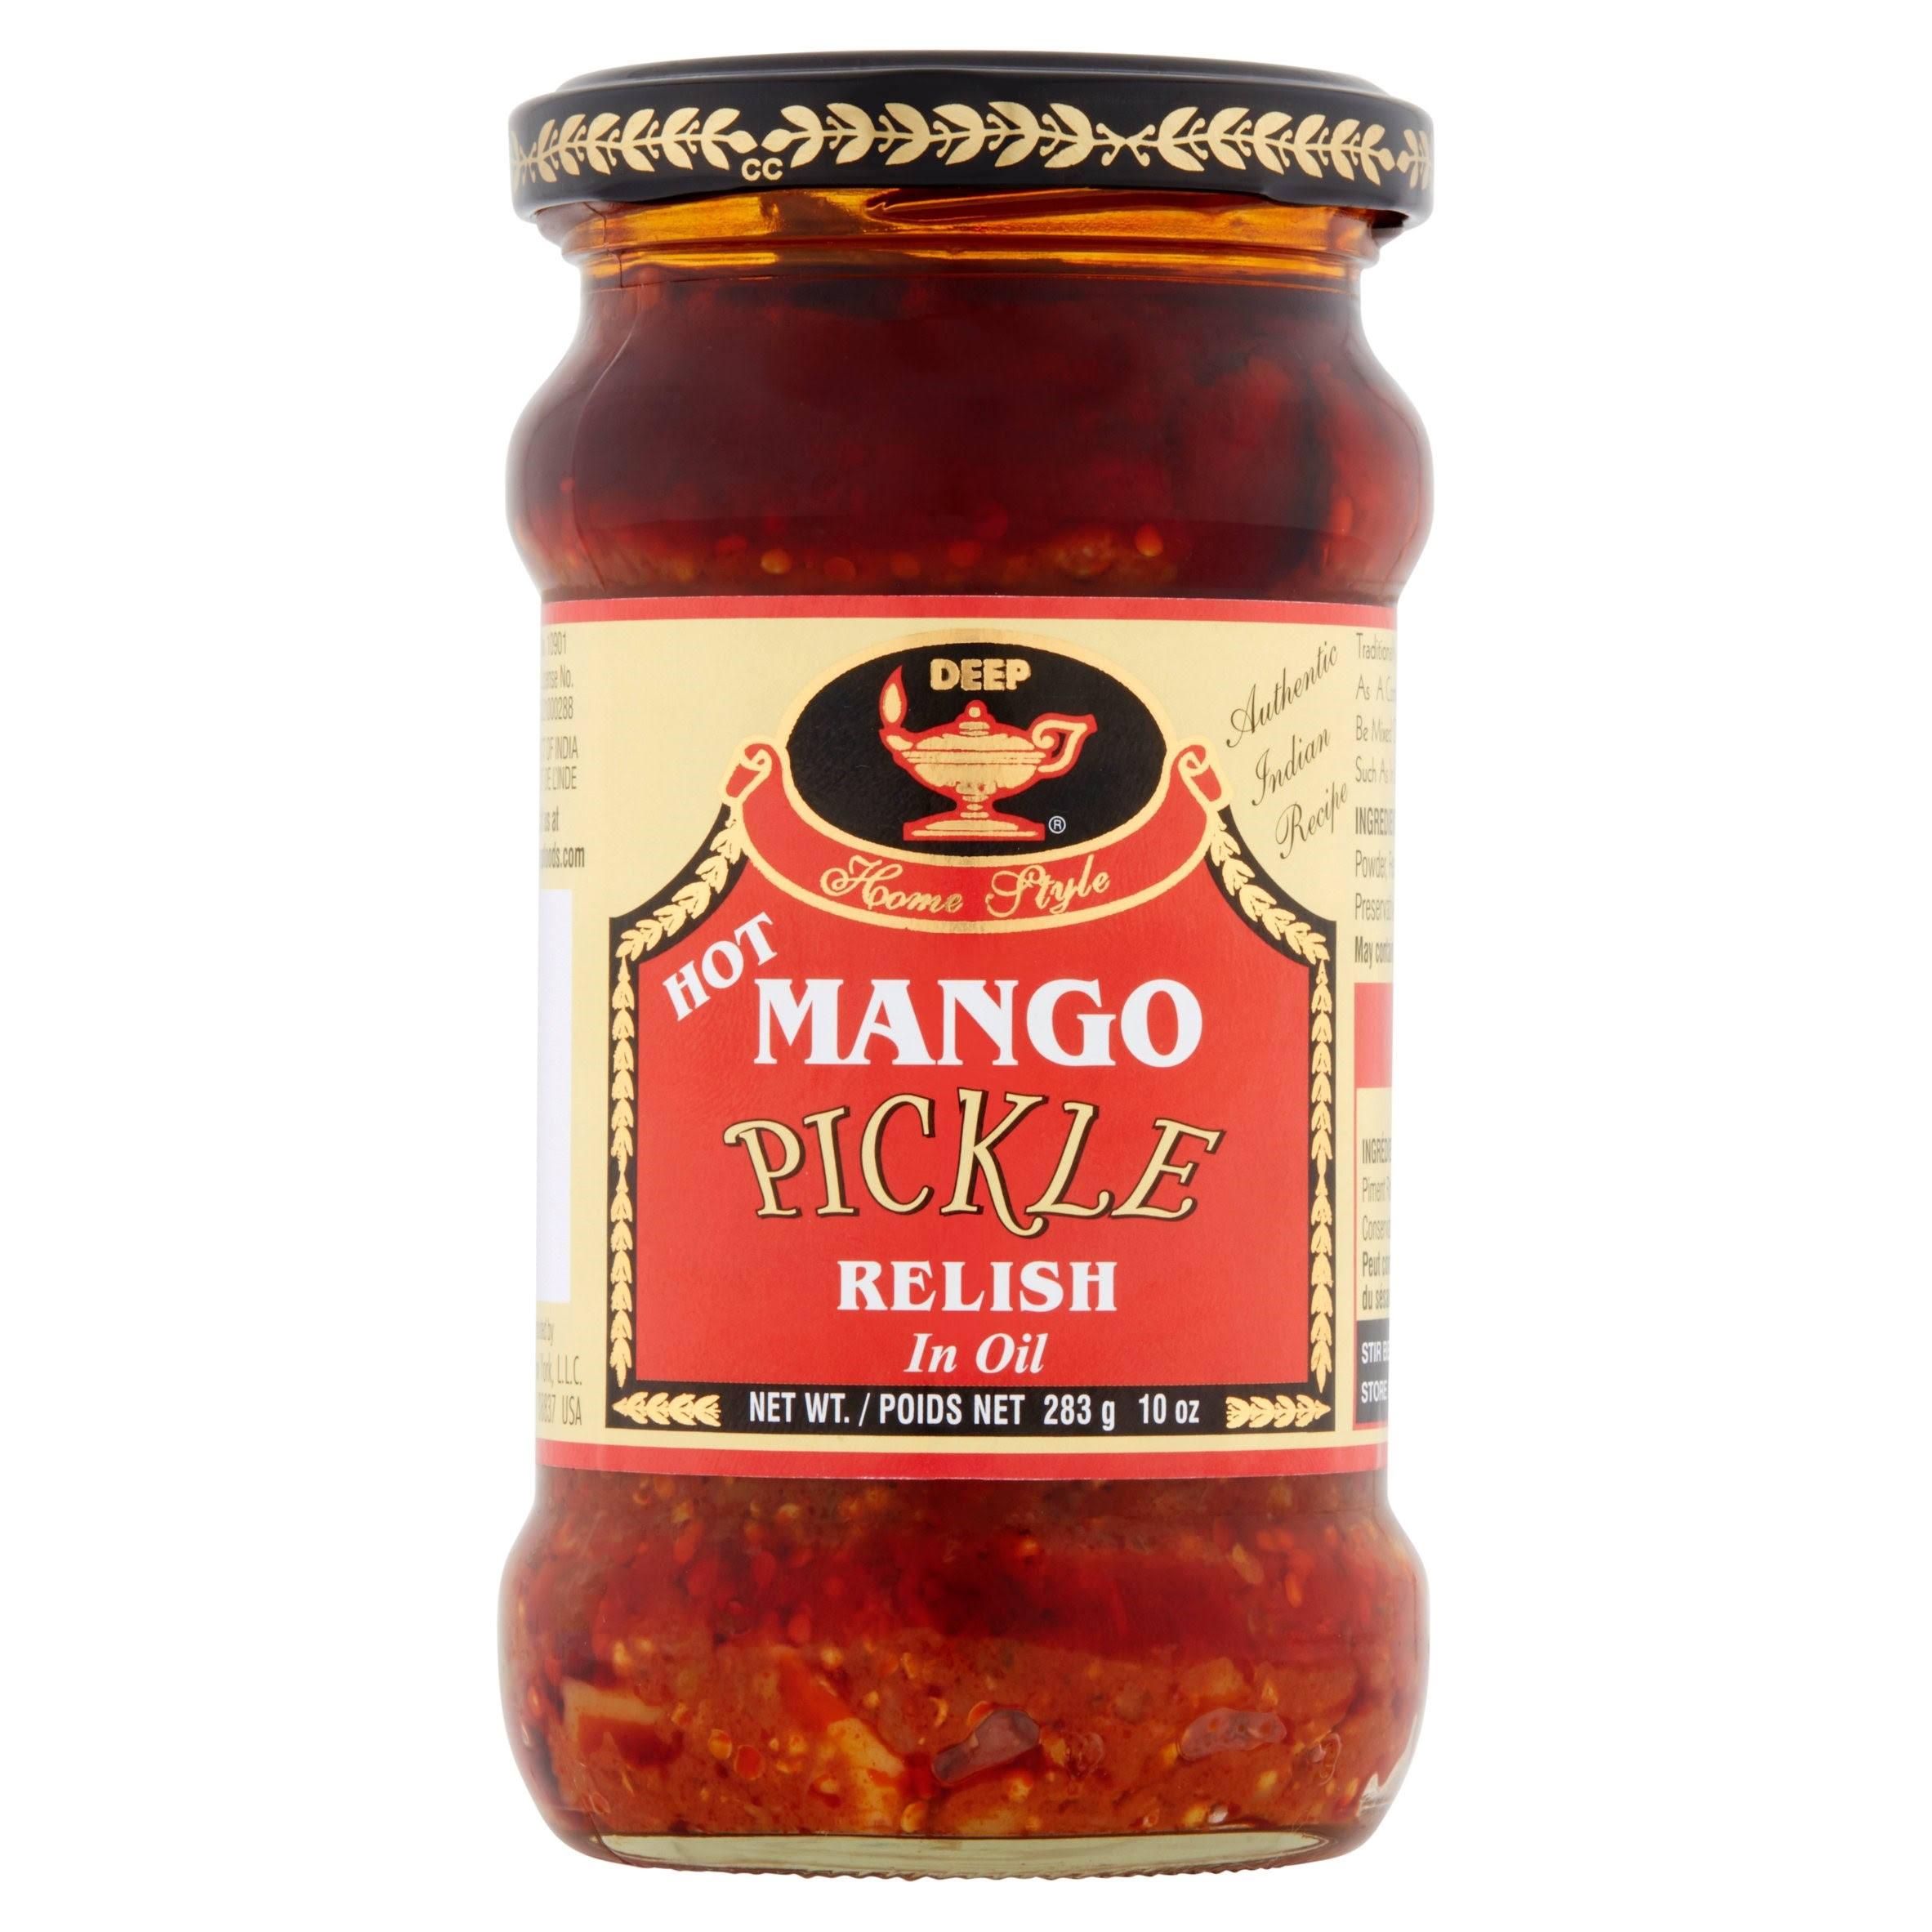 Deep Home Style Hot Mango Pickle Relish - in Oil, 10oz